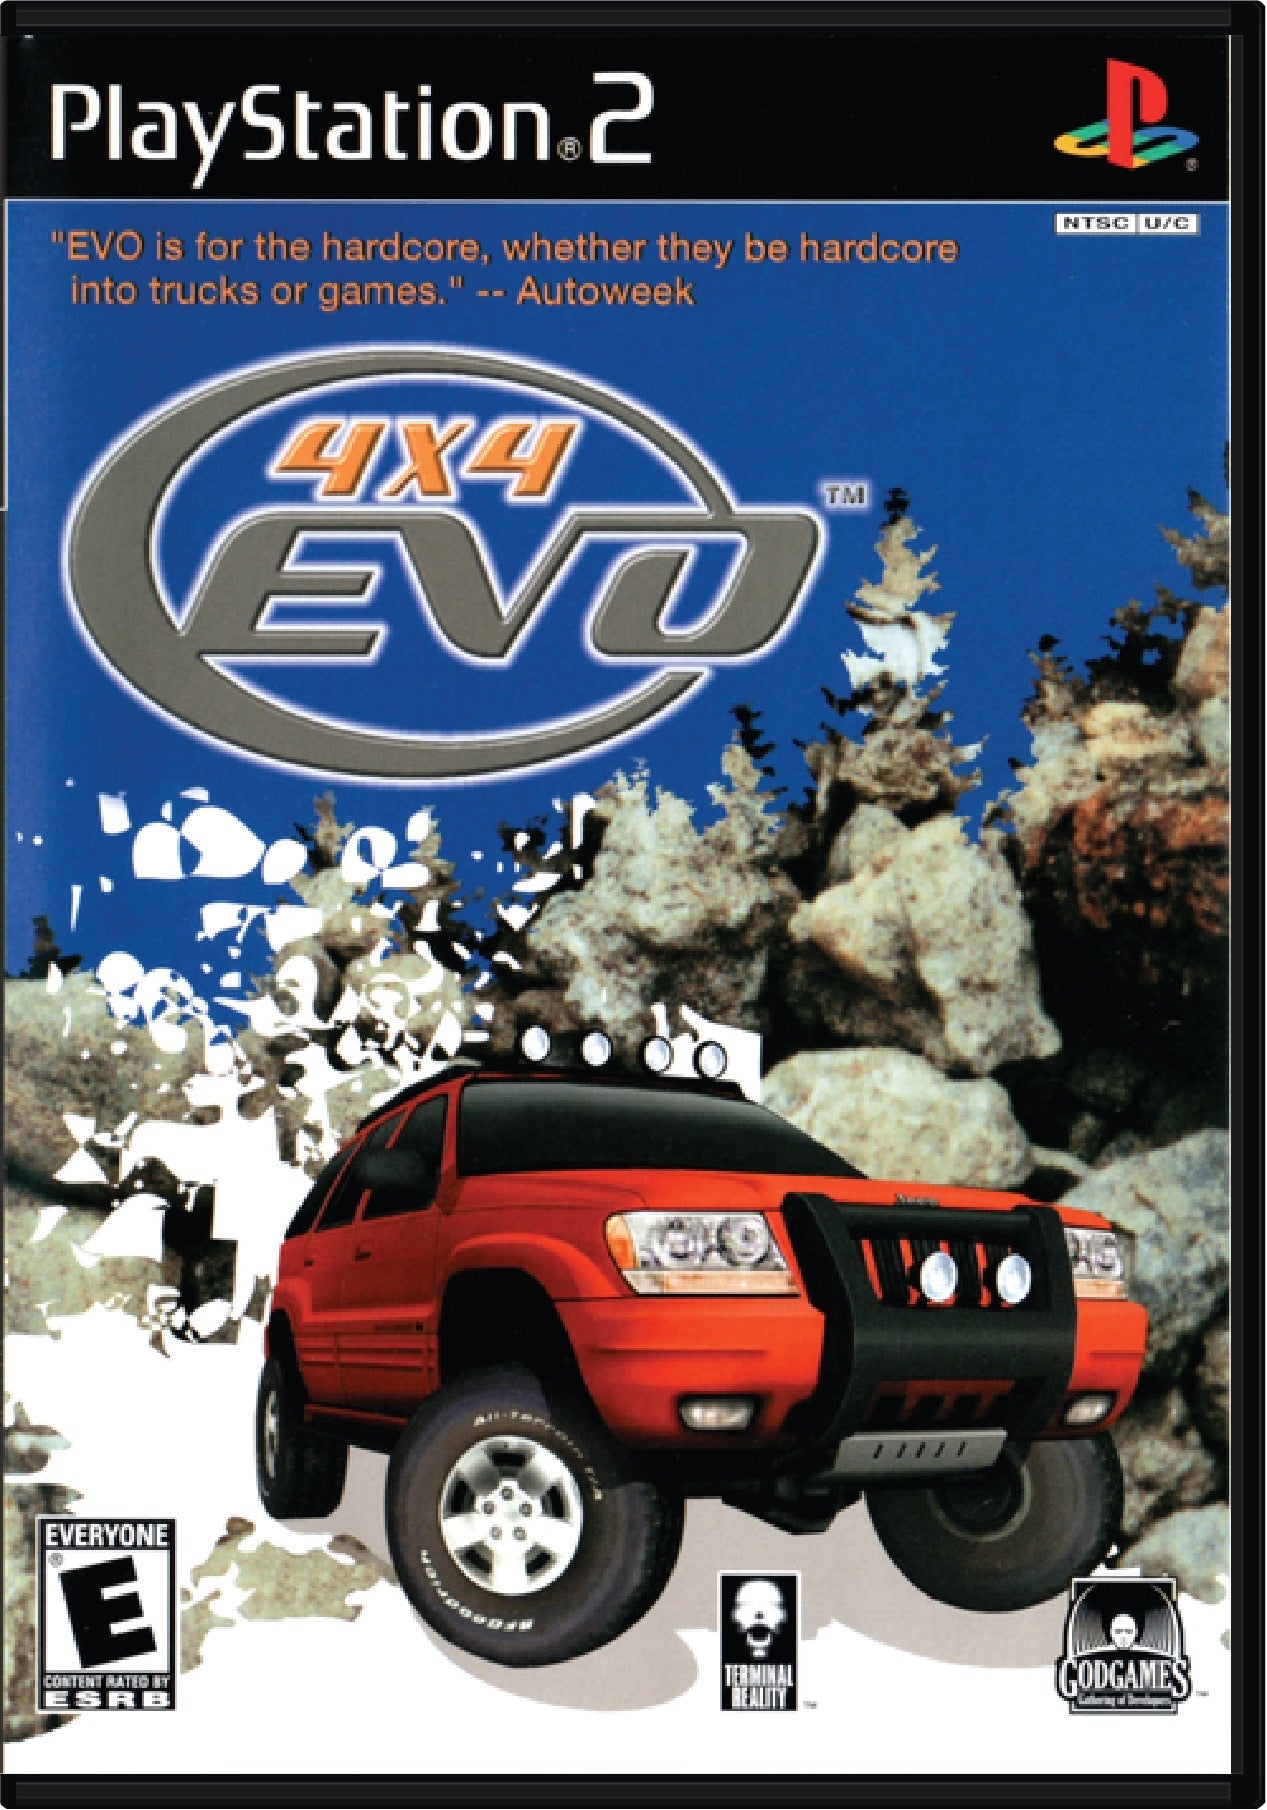 4x4 Evo Cover Art and Product Photo